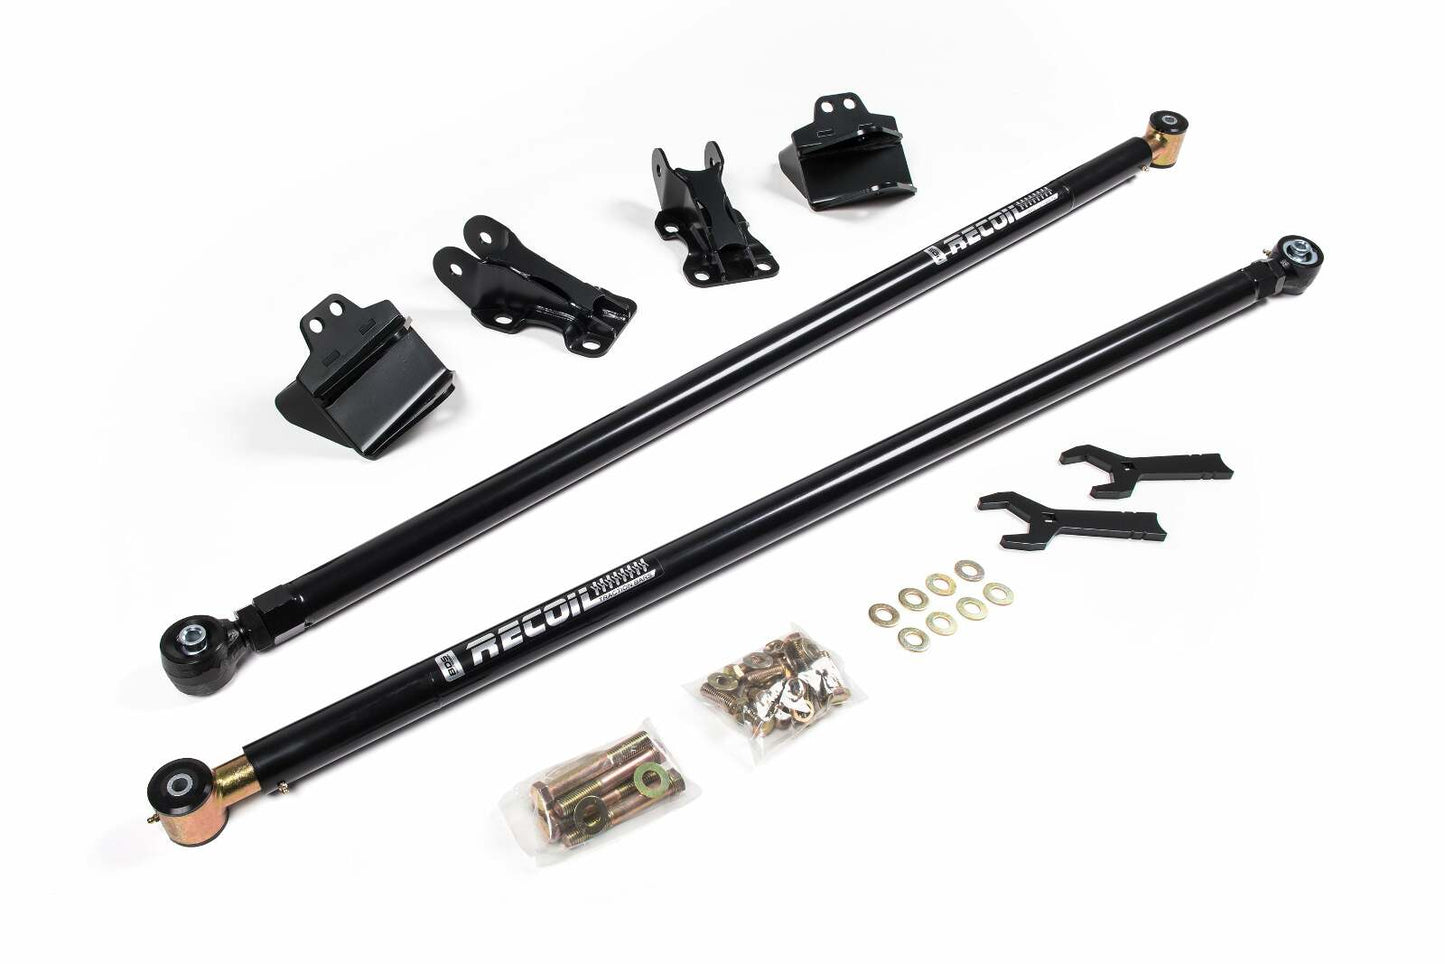 2001-2010 Chevy/GMC 2500/3500 HD Recoil Traction Bar Kit